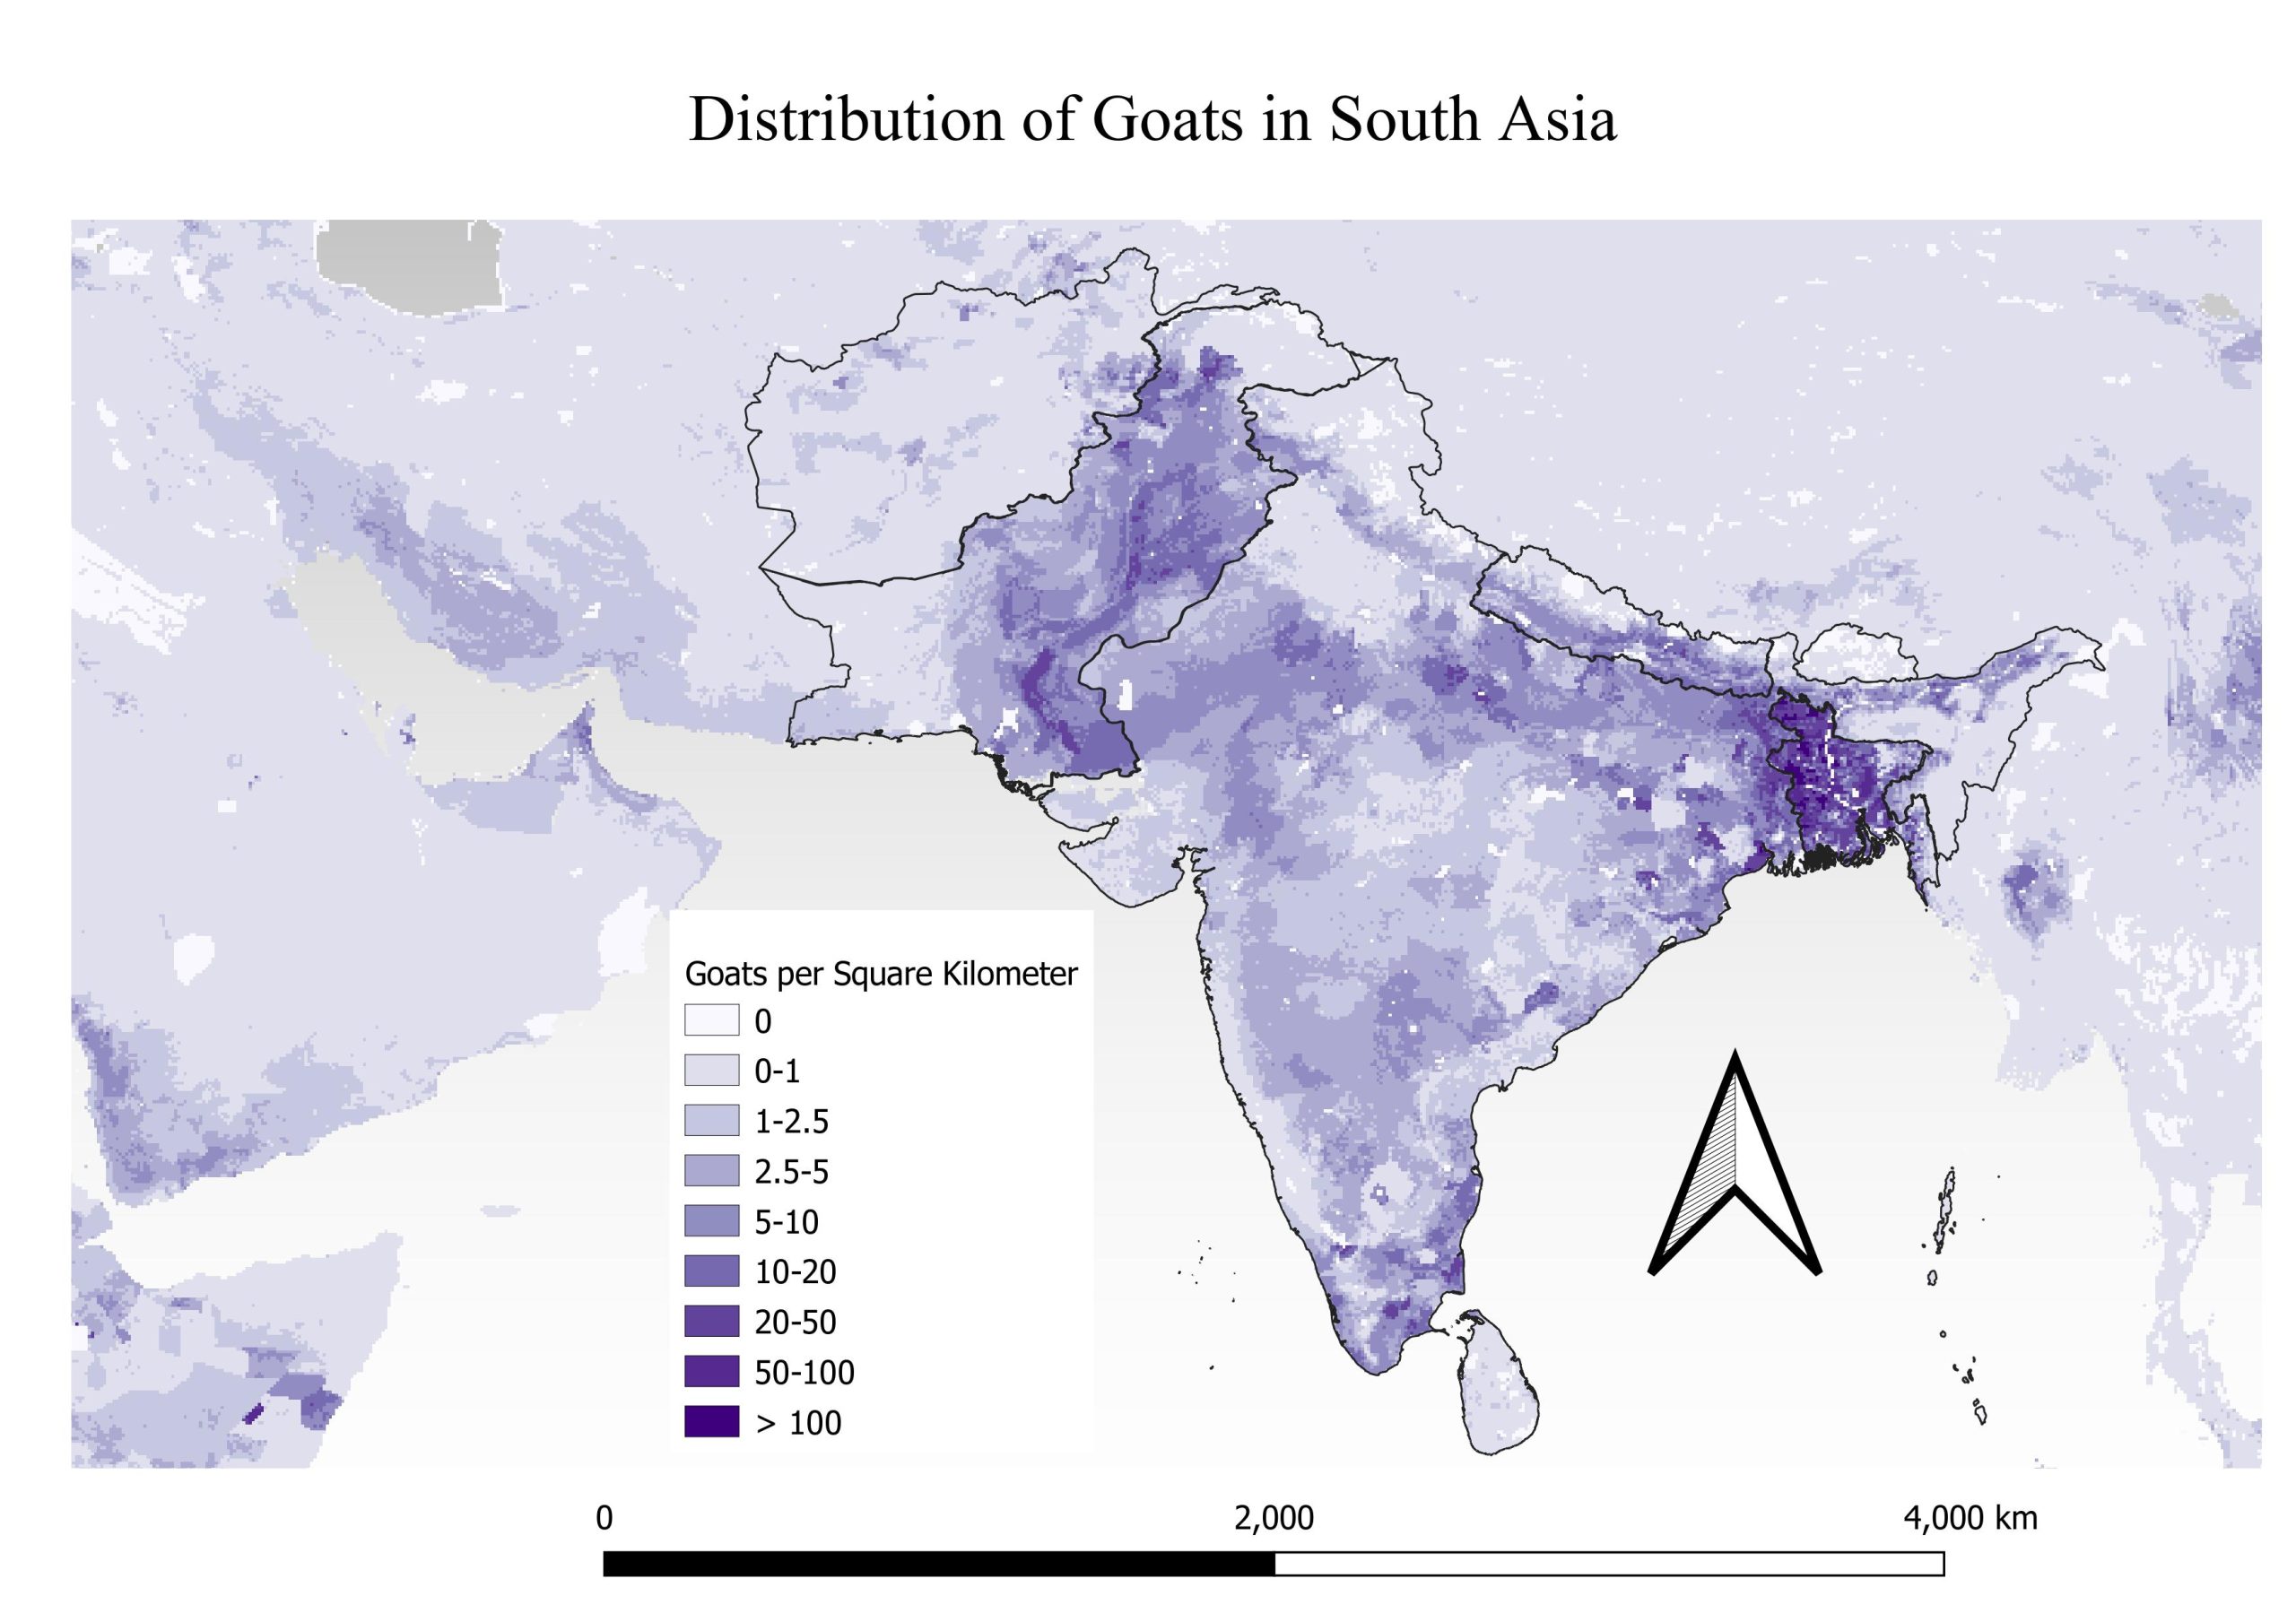 Map showing the distribution of goats per sq. km in India and Pakistan, with the highest concentrations in Punjab and Sindh provinces in Pakistan, and West Bengal state in India